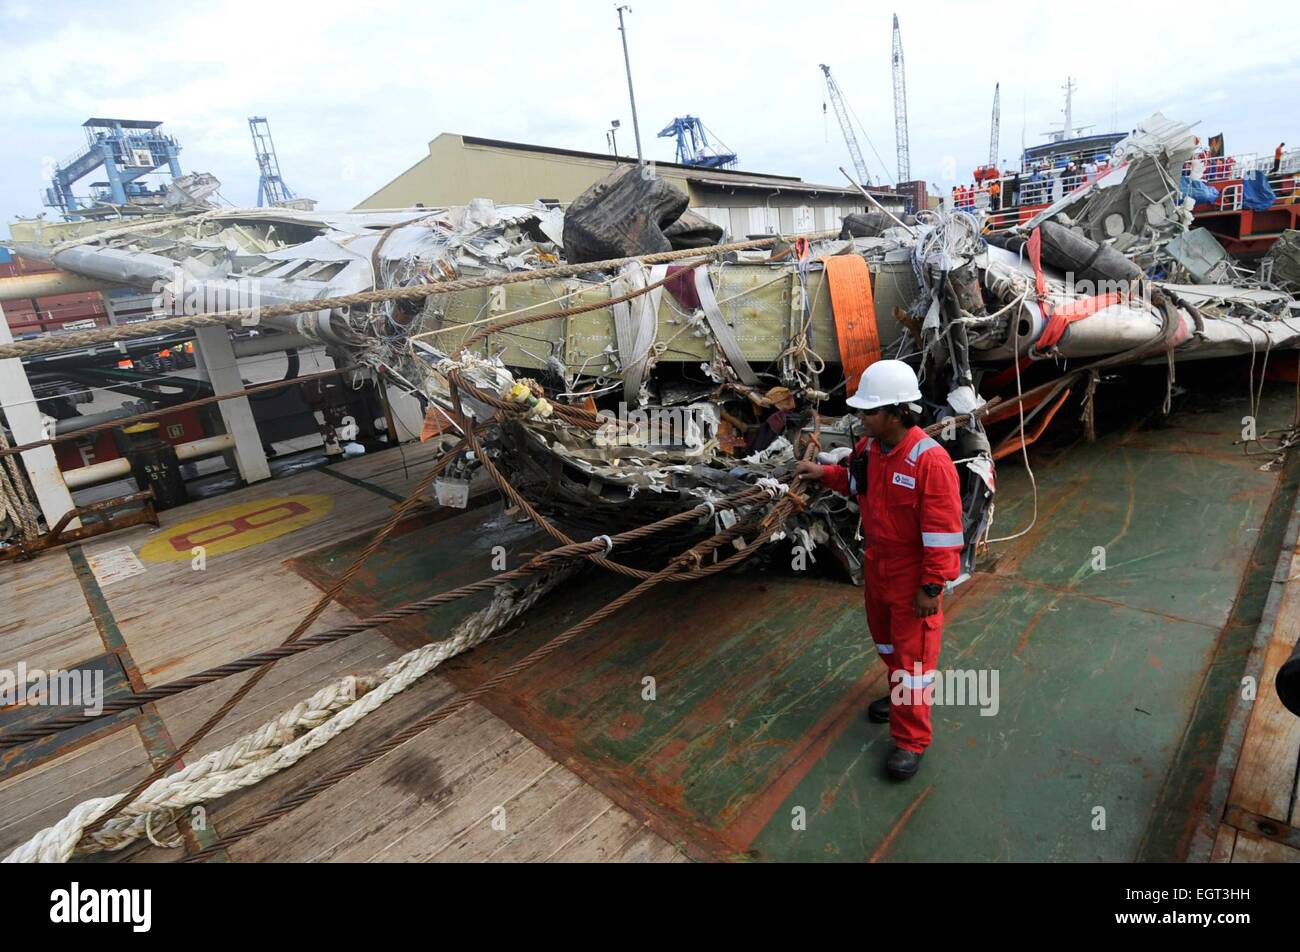 Jakarta, Indonesia. 2nd Mar, 2015. An official checks a large part of AirAsia QZ 8501 fuselage at Tanjung Priok harbor in Jakarta, Indonesia, March 2, 2015. Indonesian officials said on Saturday that the final major part of the fuselage of the AirAsia QZ 8501 has been retrieved. AirAsia QZ 8501 was crashed in Karimata Strait enroute from Indonesia's city of Surabaya for Singapore on Dec. 28, killing all 162 people onboard. © Agung Kuncahya B./Xinhua/Alamy Live News Stock Photo